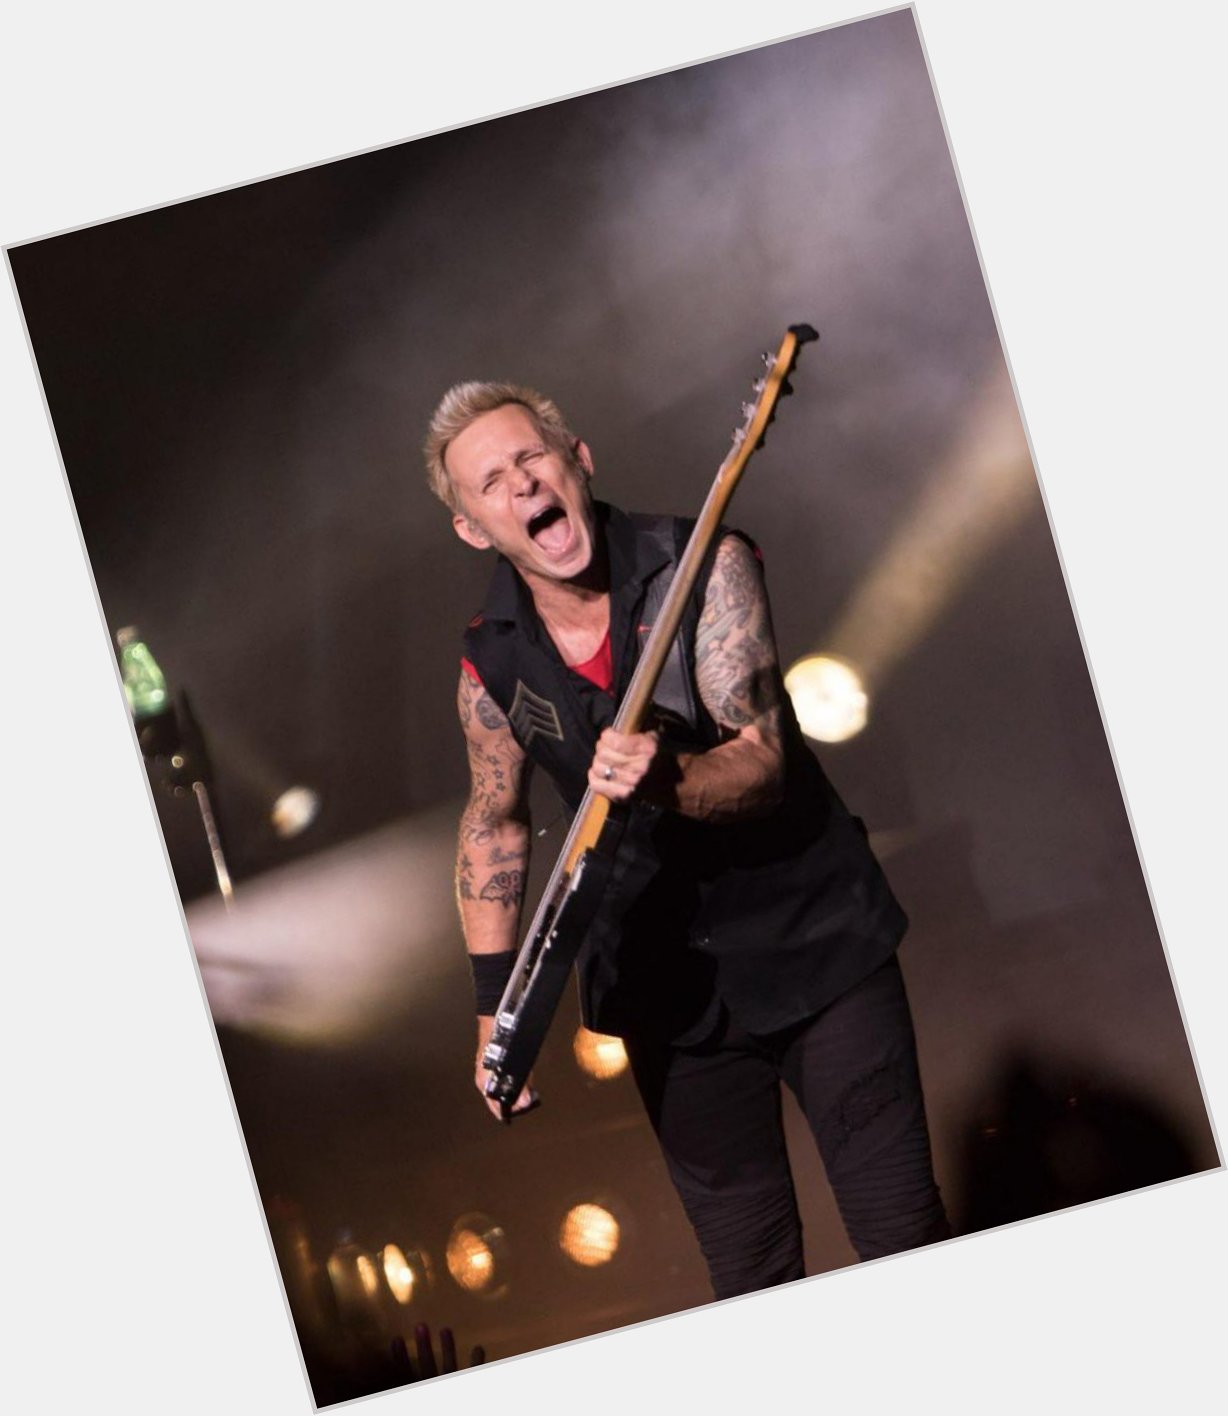 Happy 50 birthday to the amazing Green Day bassist Mike Dirnt! 